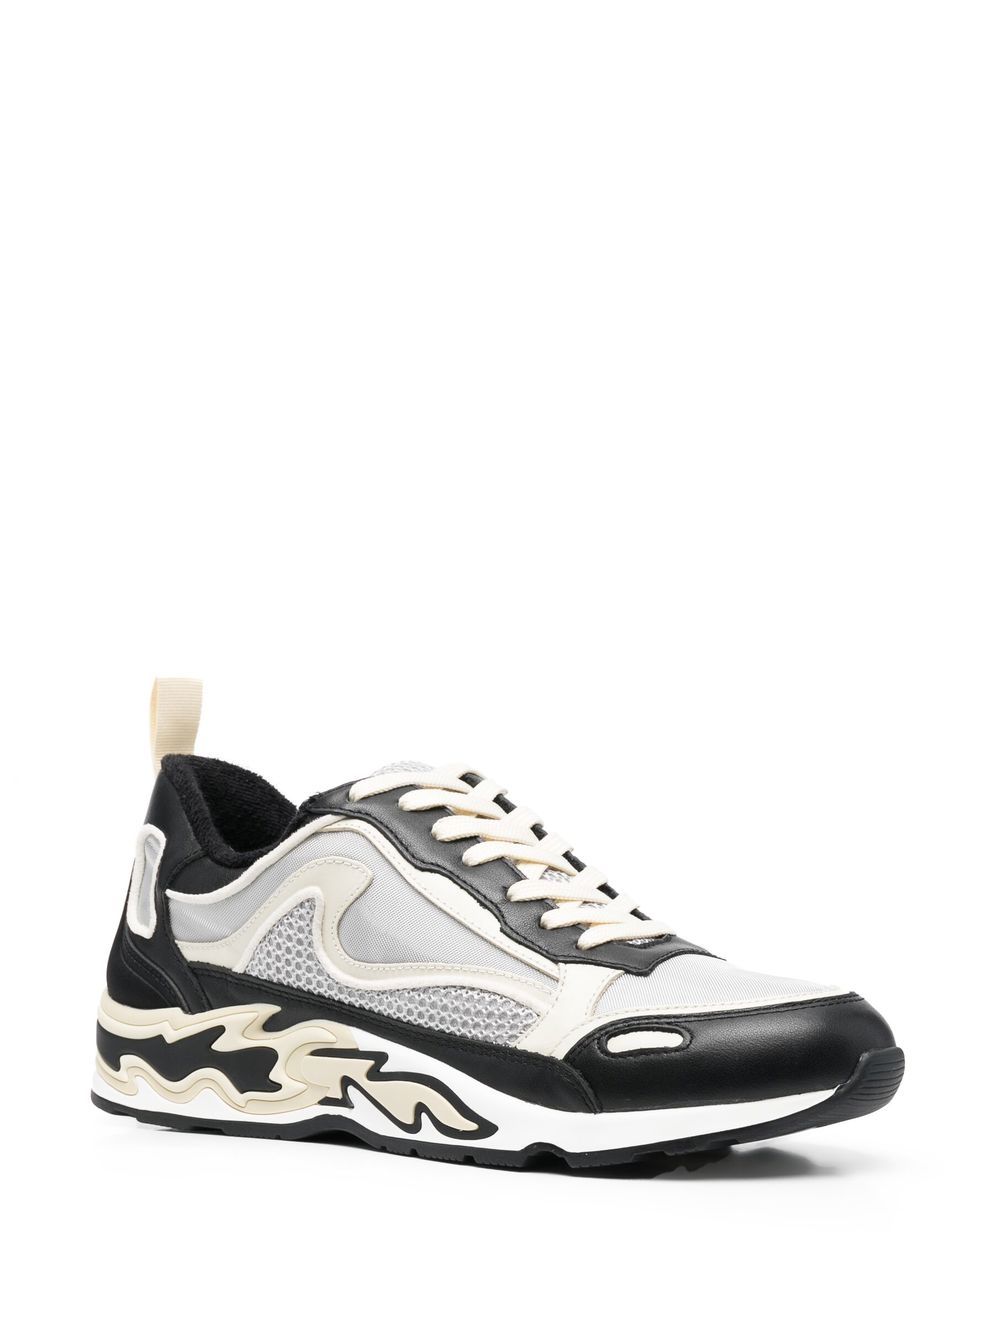 SANDRO Flame low-top Sneakers - Farfetch